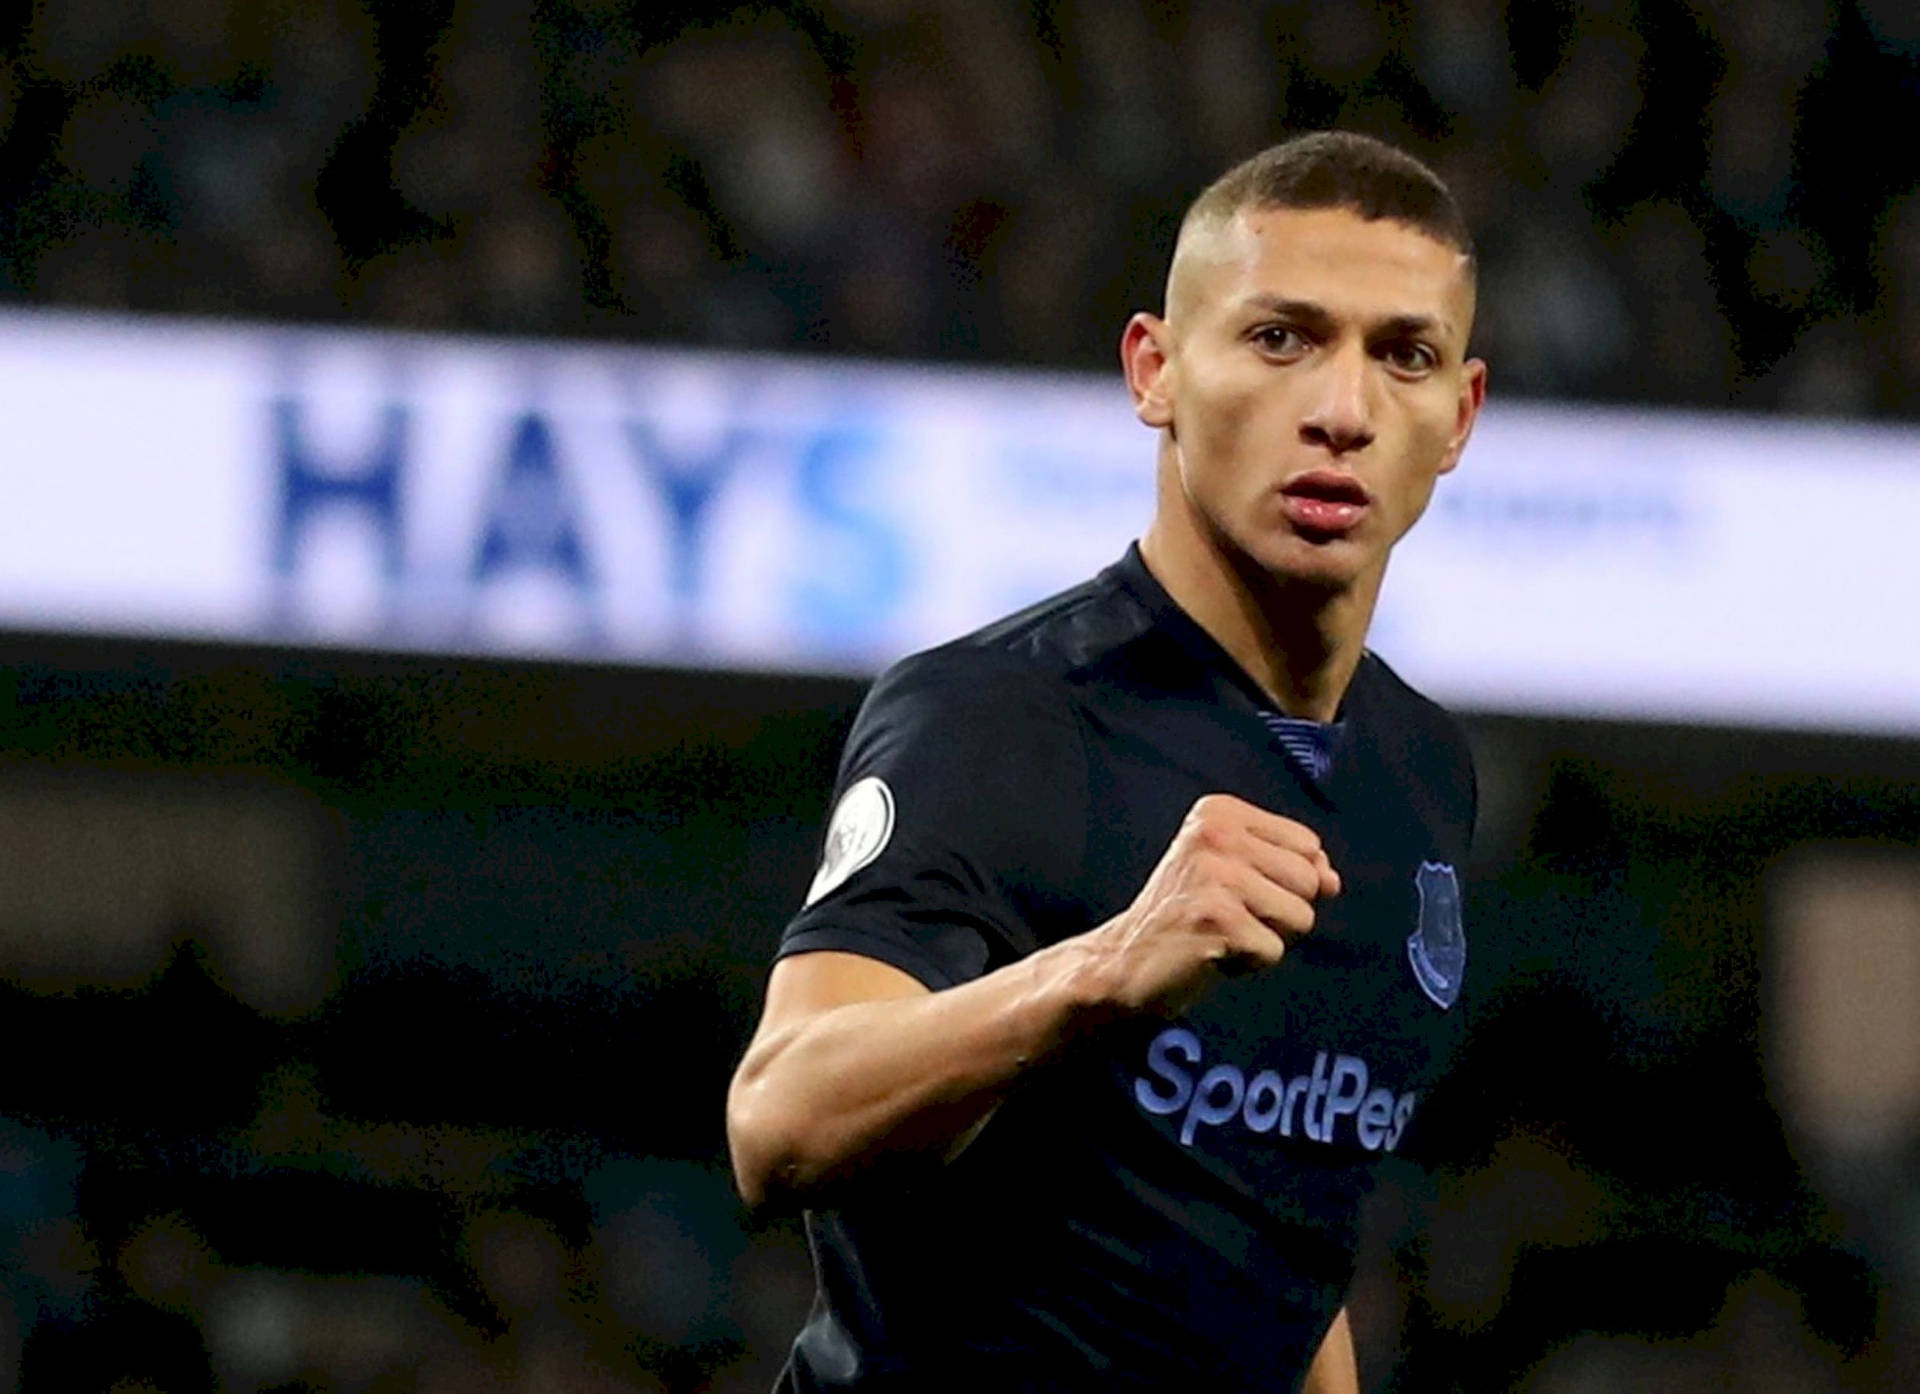 Caption: Richarlison De Andrade Triumphantly Clenching His Fist After a Successful Game Wallpaper